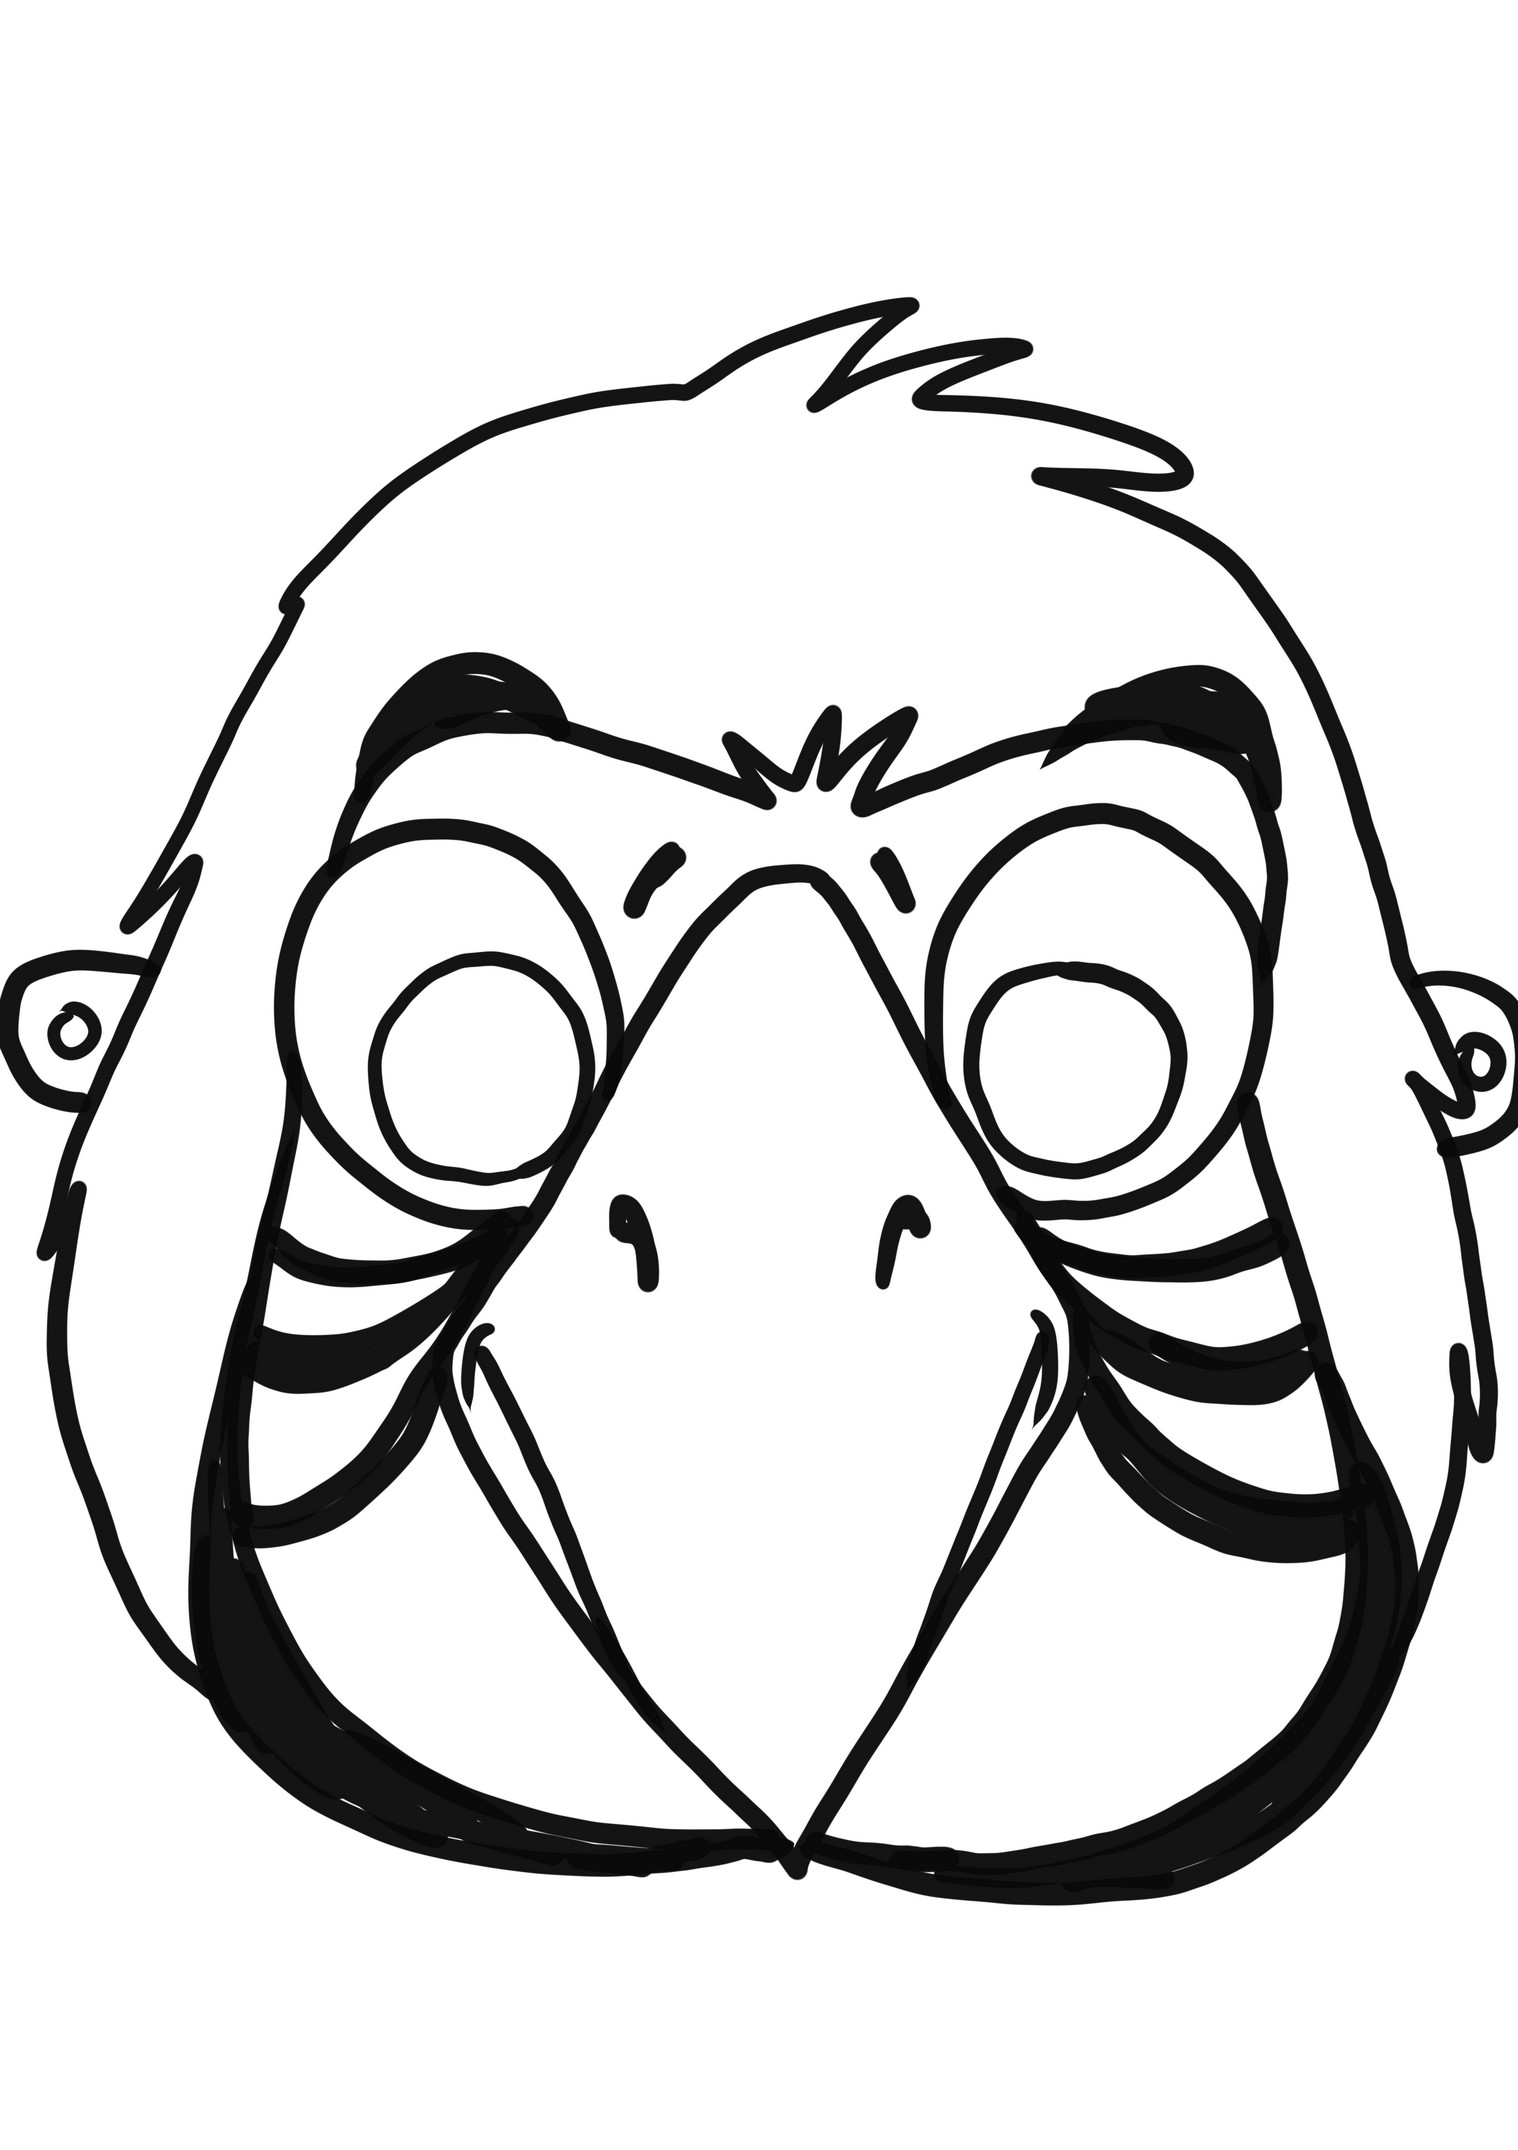 Macaw Parrot Mask coloring page to cut out